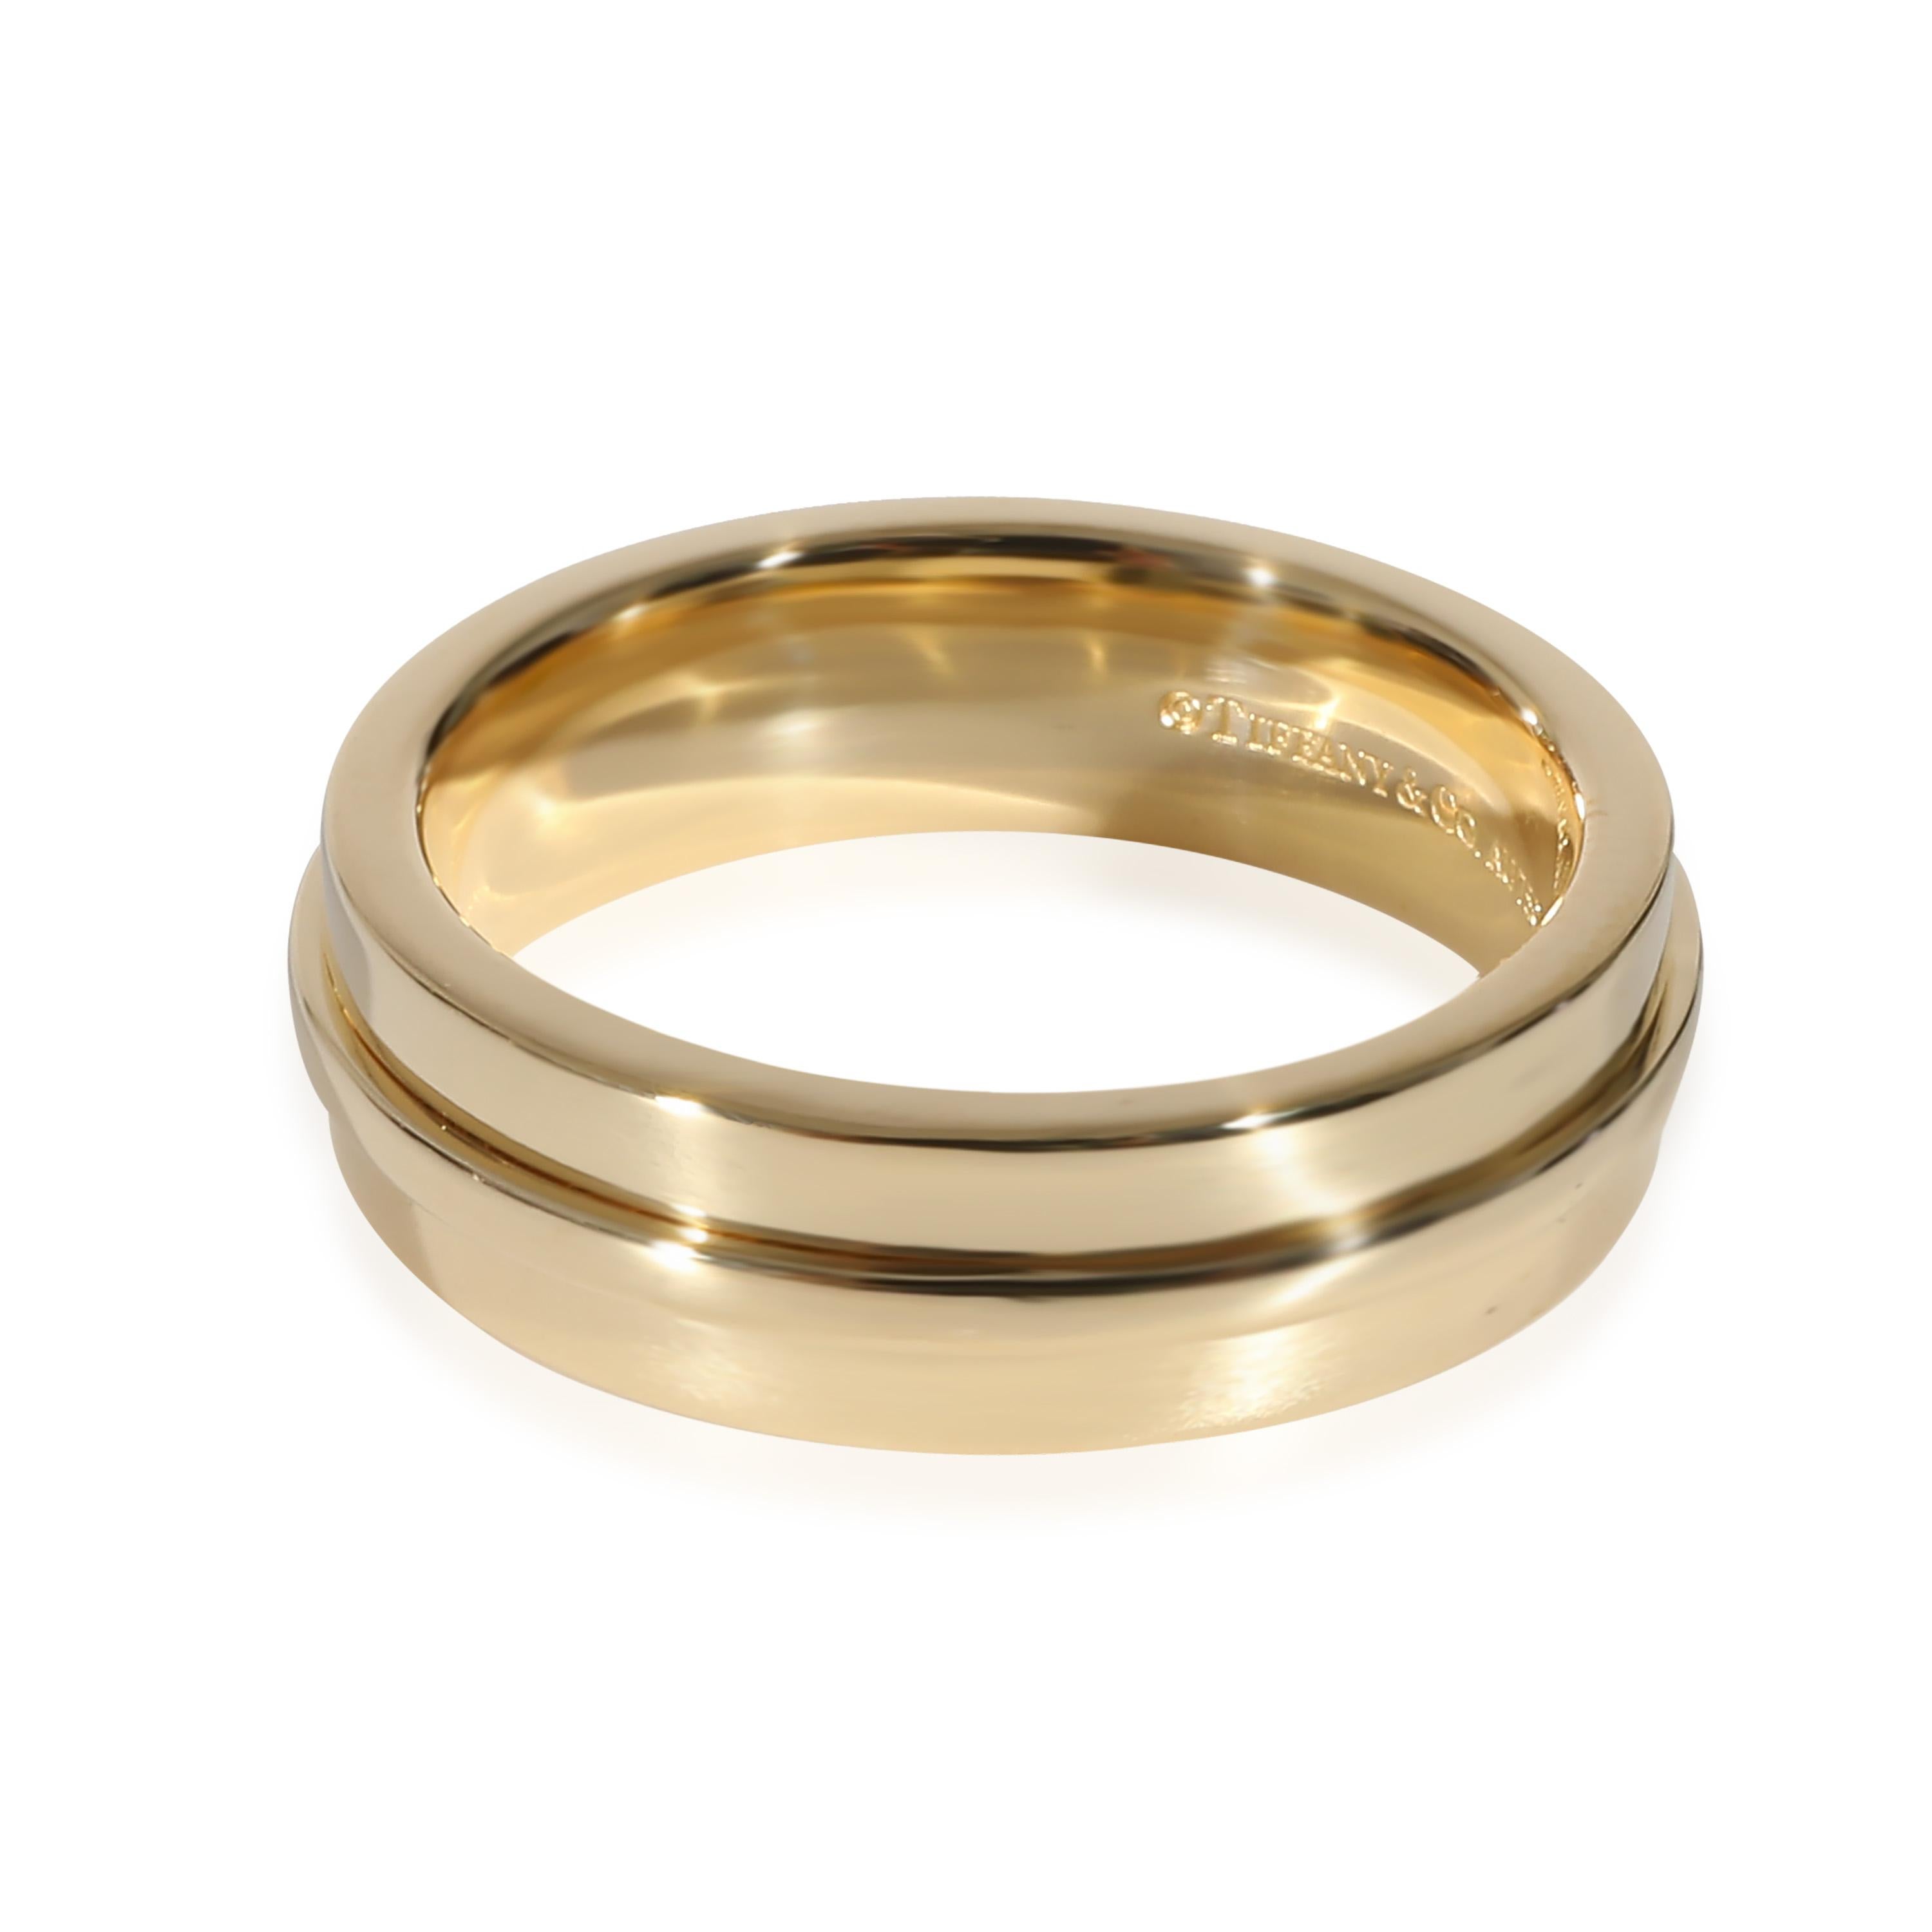 Tiffany & Co. Tiffany T Ring in 18K Yellow Gold

PRIMARY DETAILS
SKU: 135437
Listing Title: Tiffany & Co. Tiffany T Ring in 18K Yellow Gold
Condition Description: Inspired by the 'T' motif that Tiffany has been incorporating since the '80s, the T